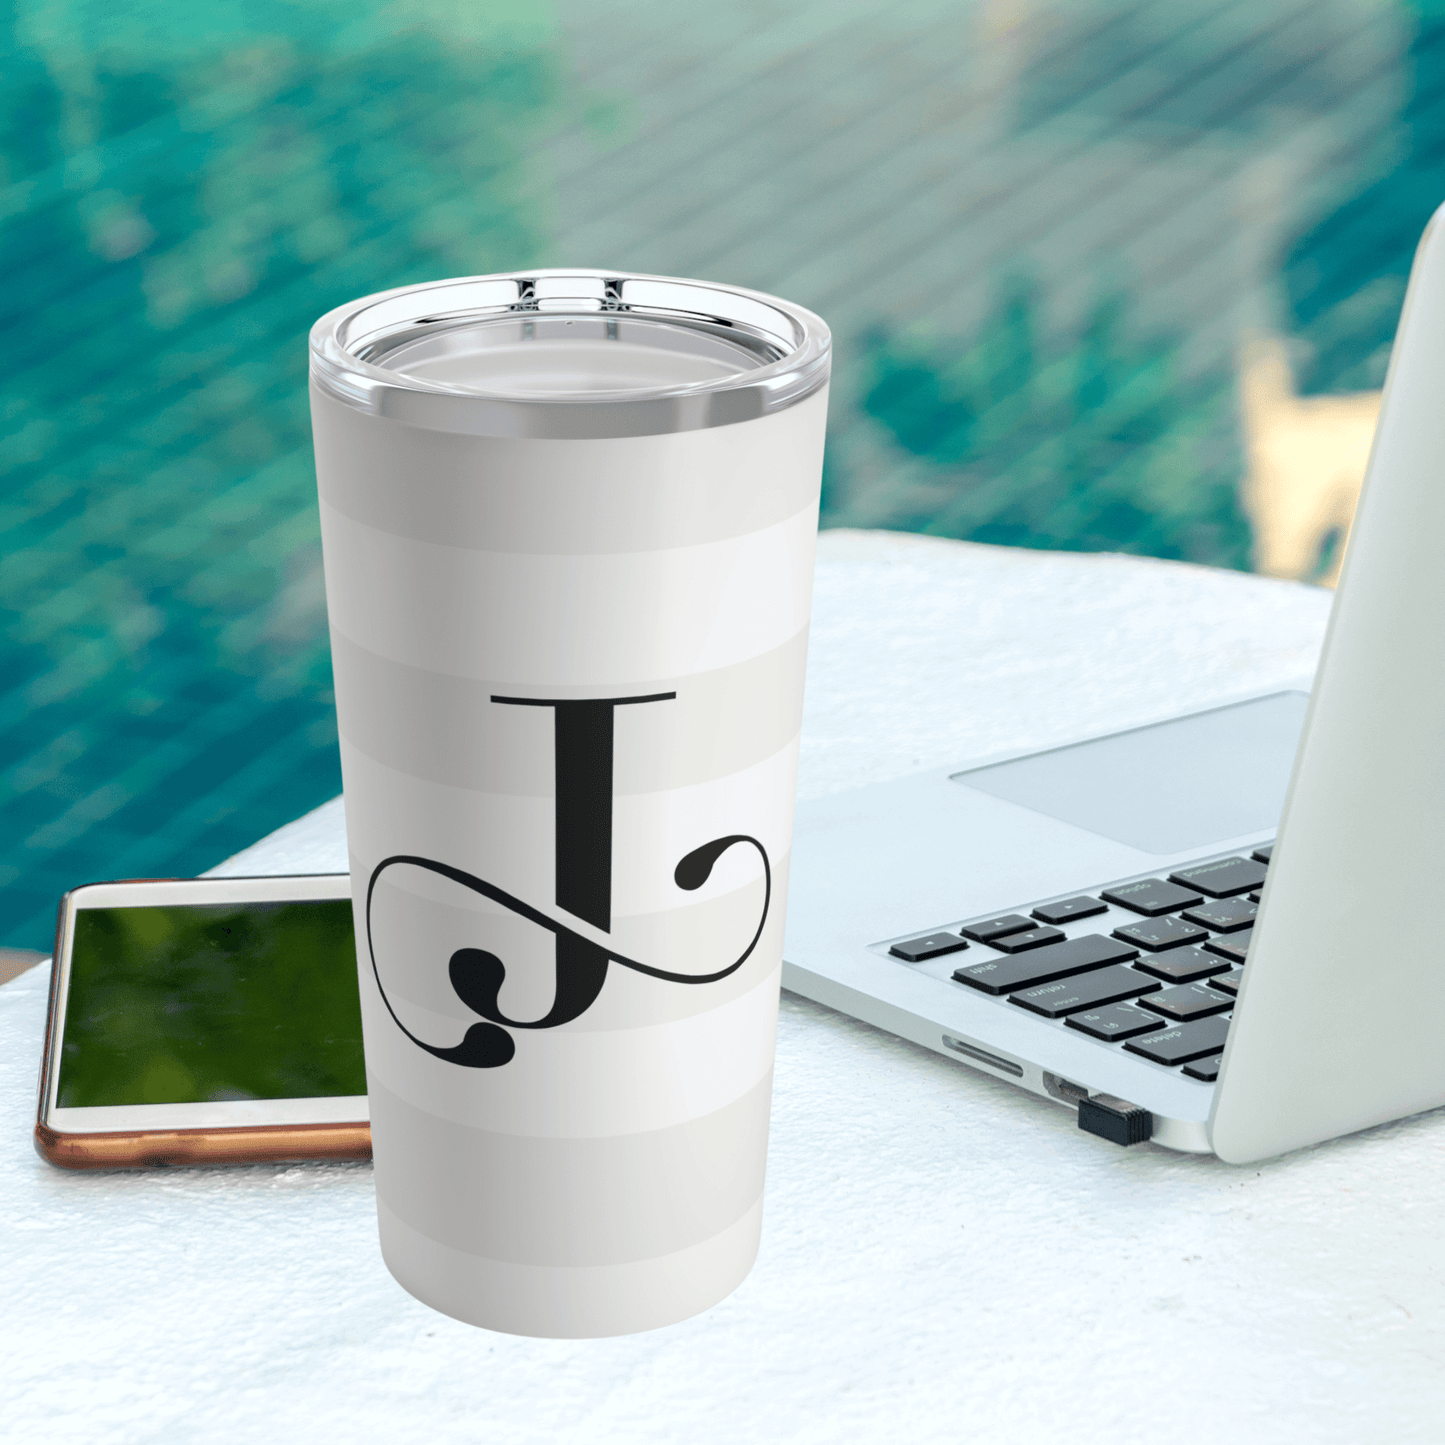 20 oz Insulated Tumbler, Elegant Monogrammed Gift for Bridesmaids, Stainless Steel Coffee Mug Travel Cup